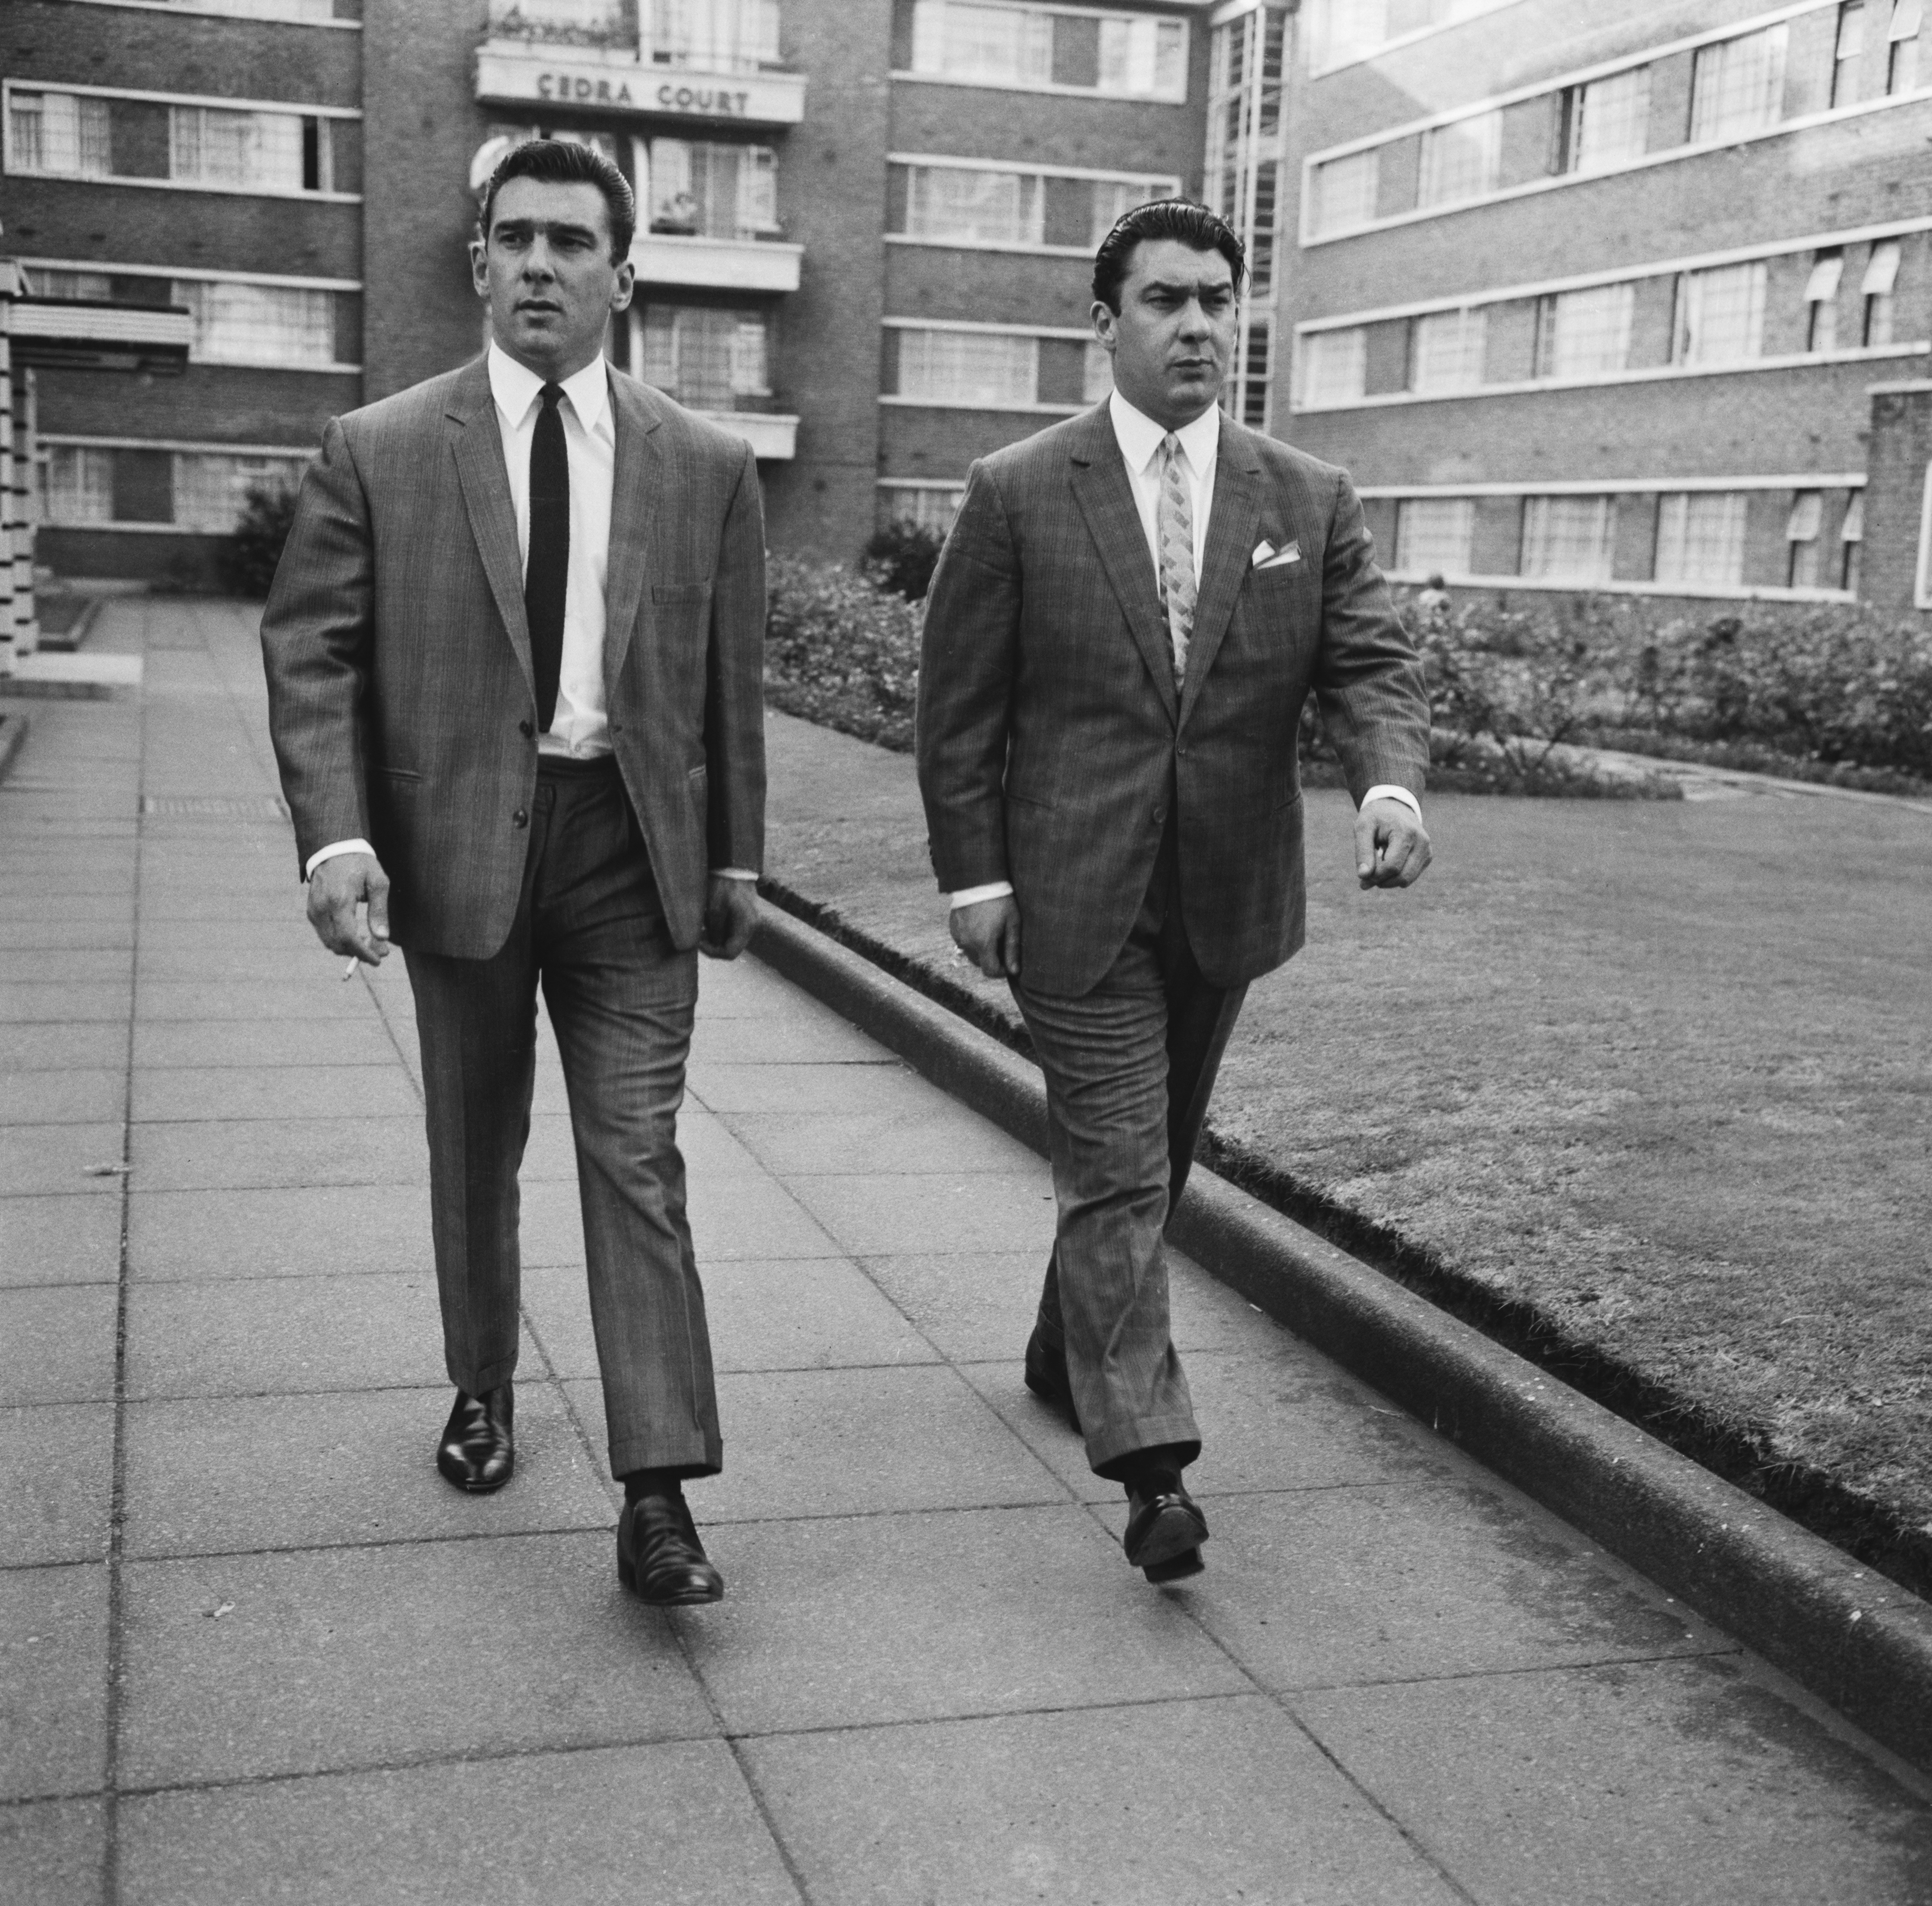 Feared gangsters Ronnie and Reggie Kray in London in 1964 eiqrqiquiqtxinv